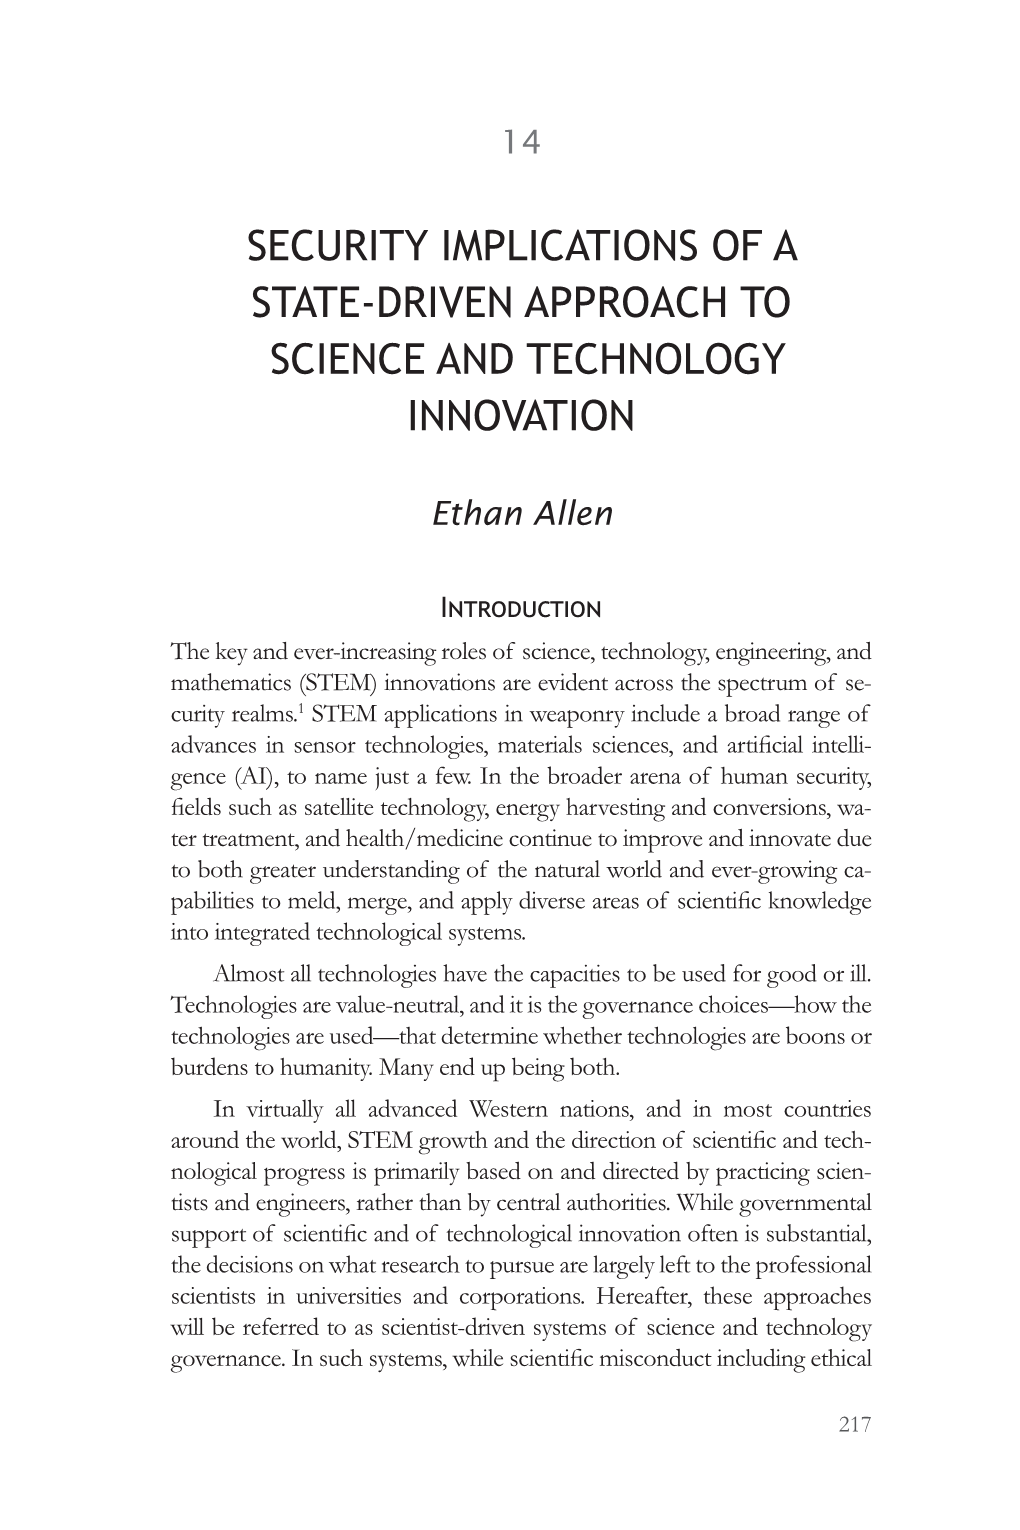 Security Implications of a State-Driven Approach to Science and Technology Innovation